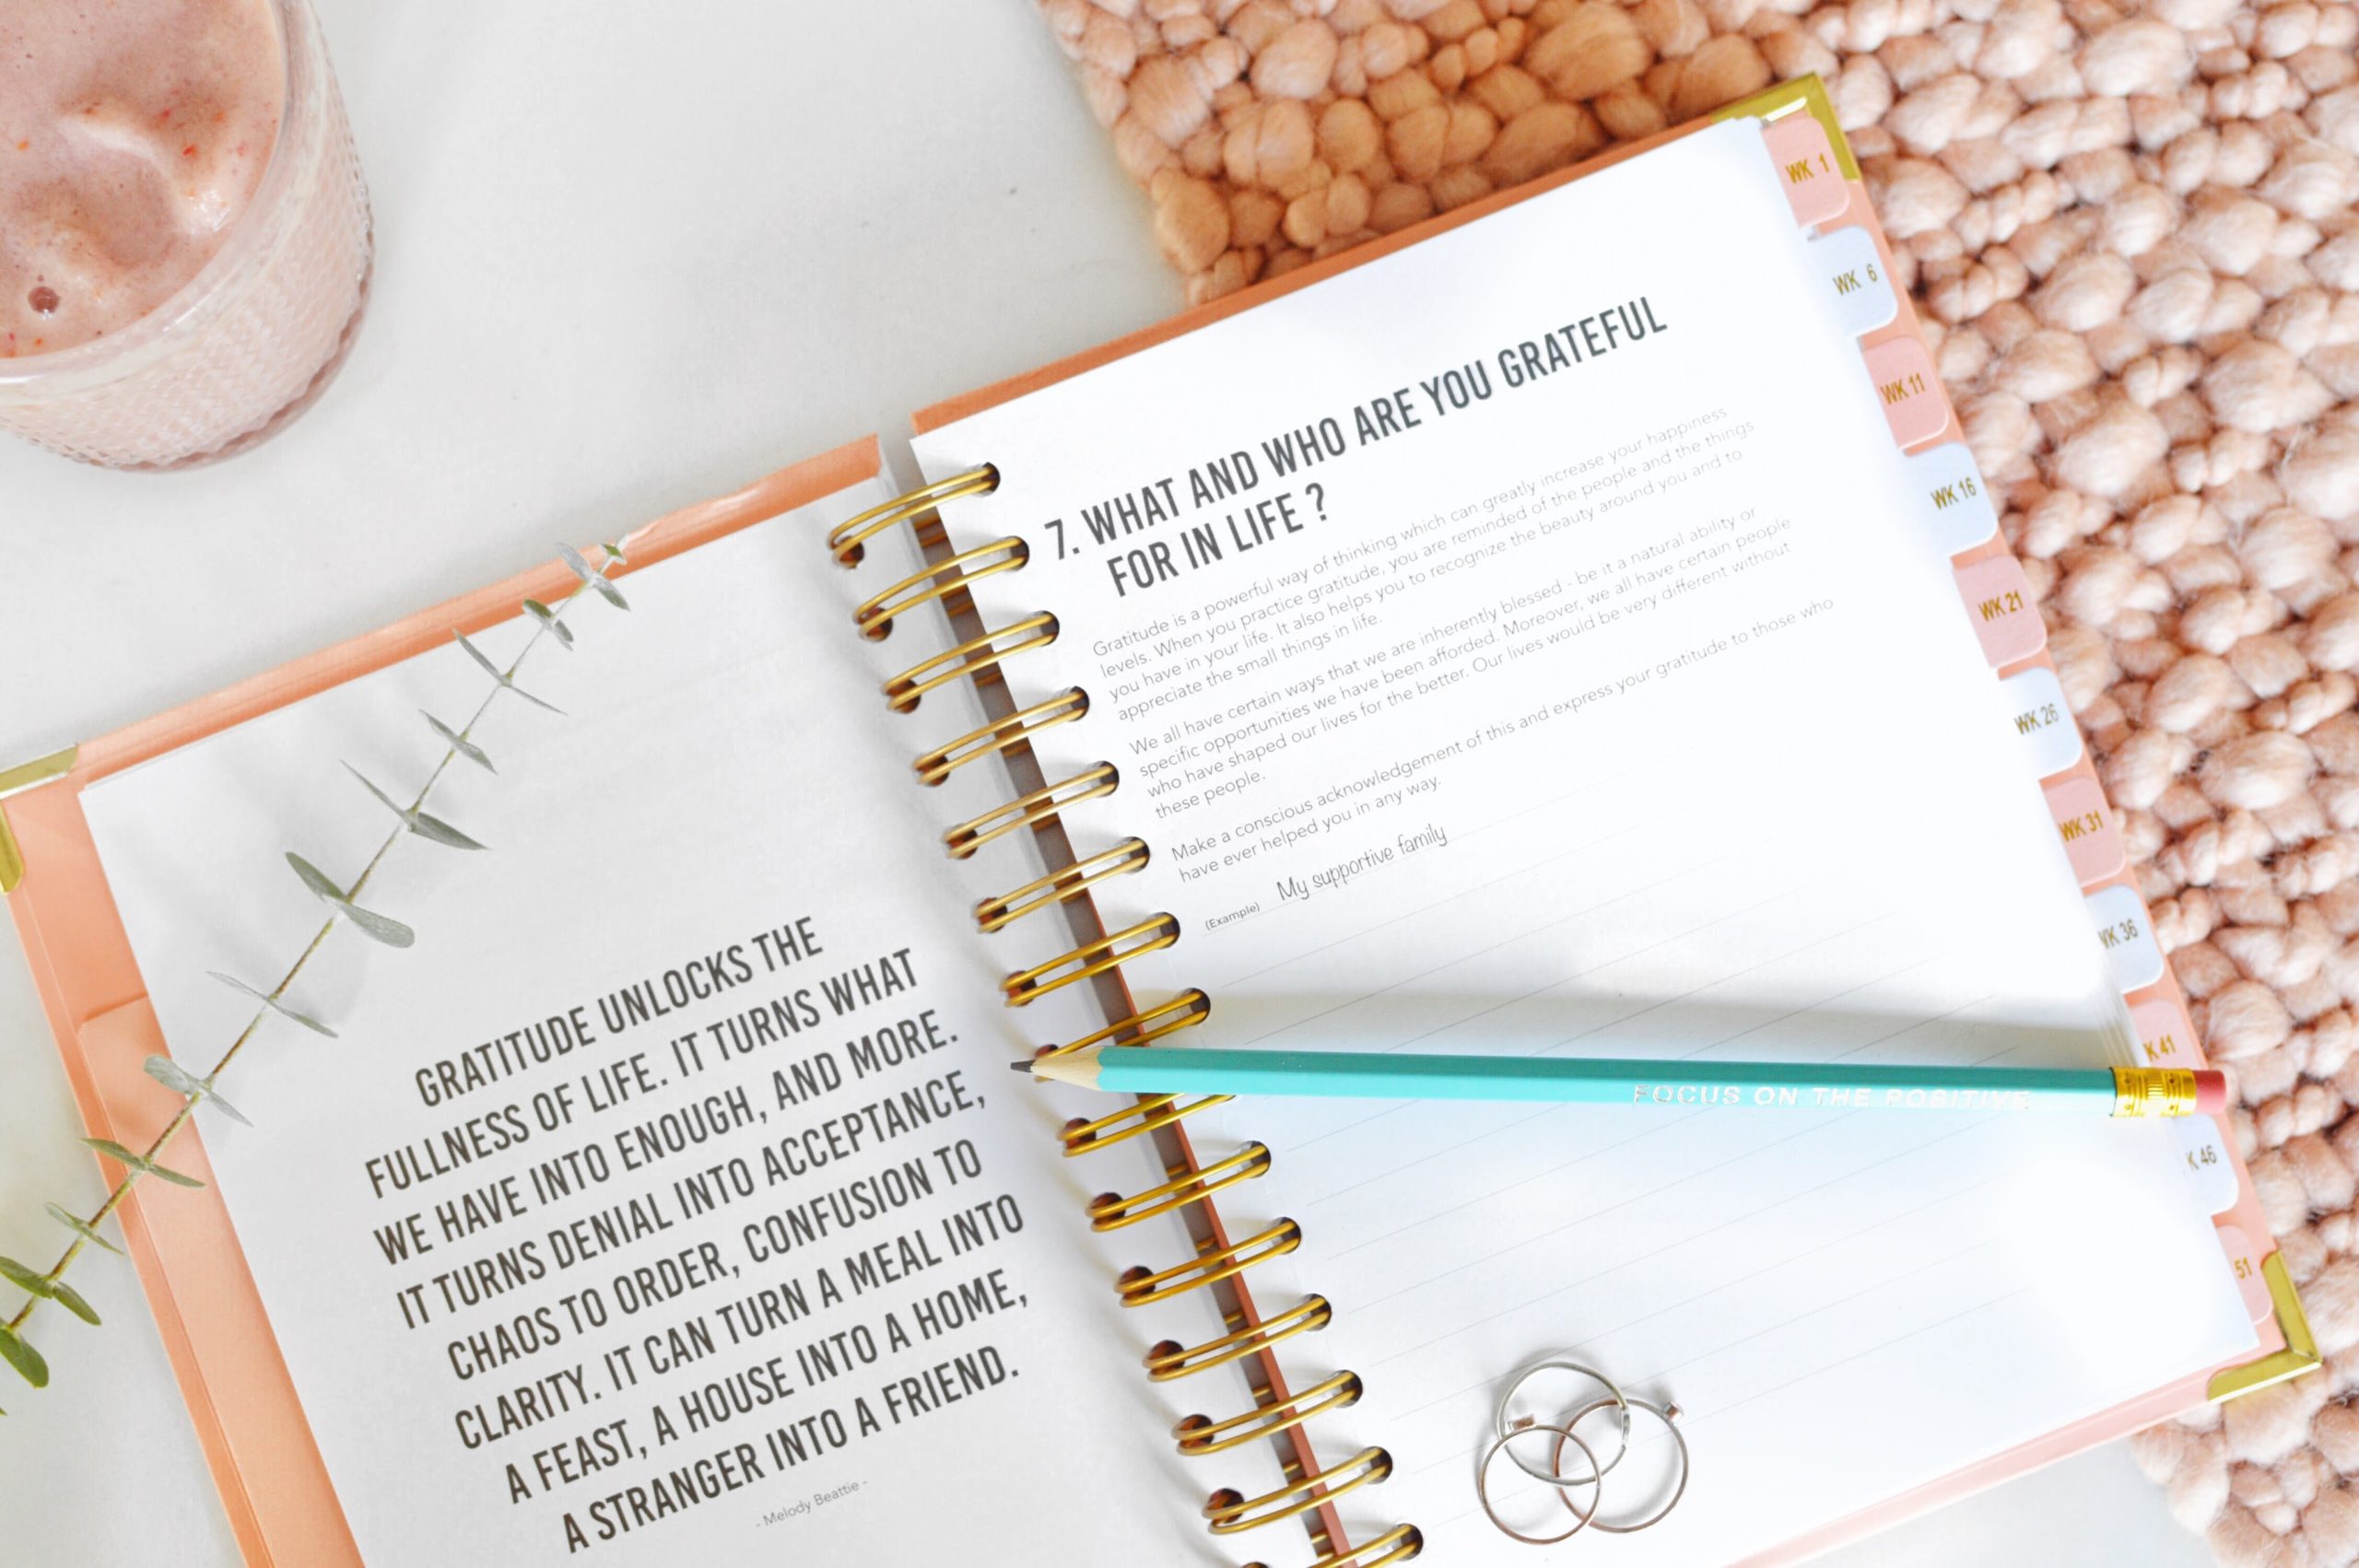 What is a gratitude journal? How do you start a gratitude journal? Here are tips to help get you started. #Journaling #GratitudeJournal #PositiveAffirmations #TheDimpleLife